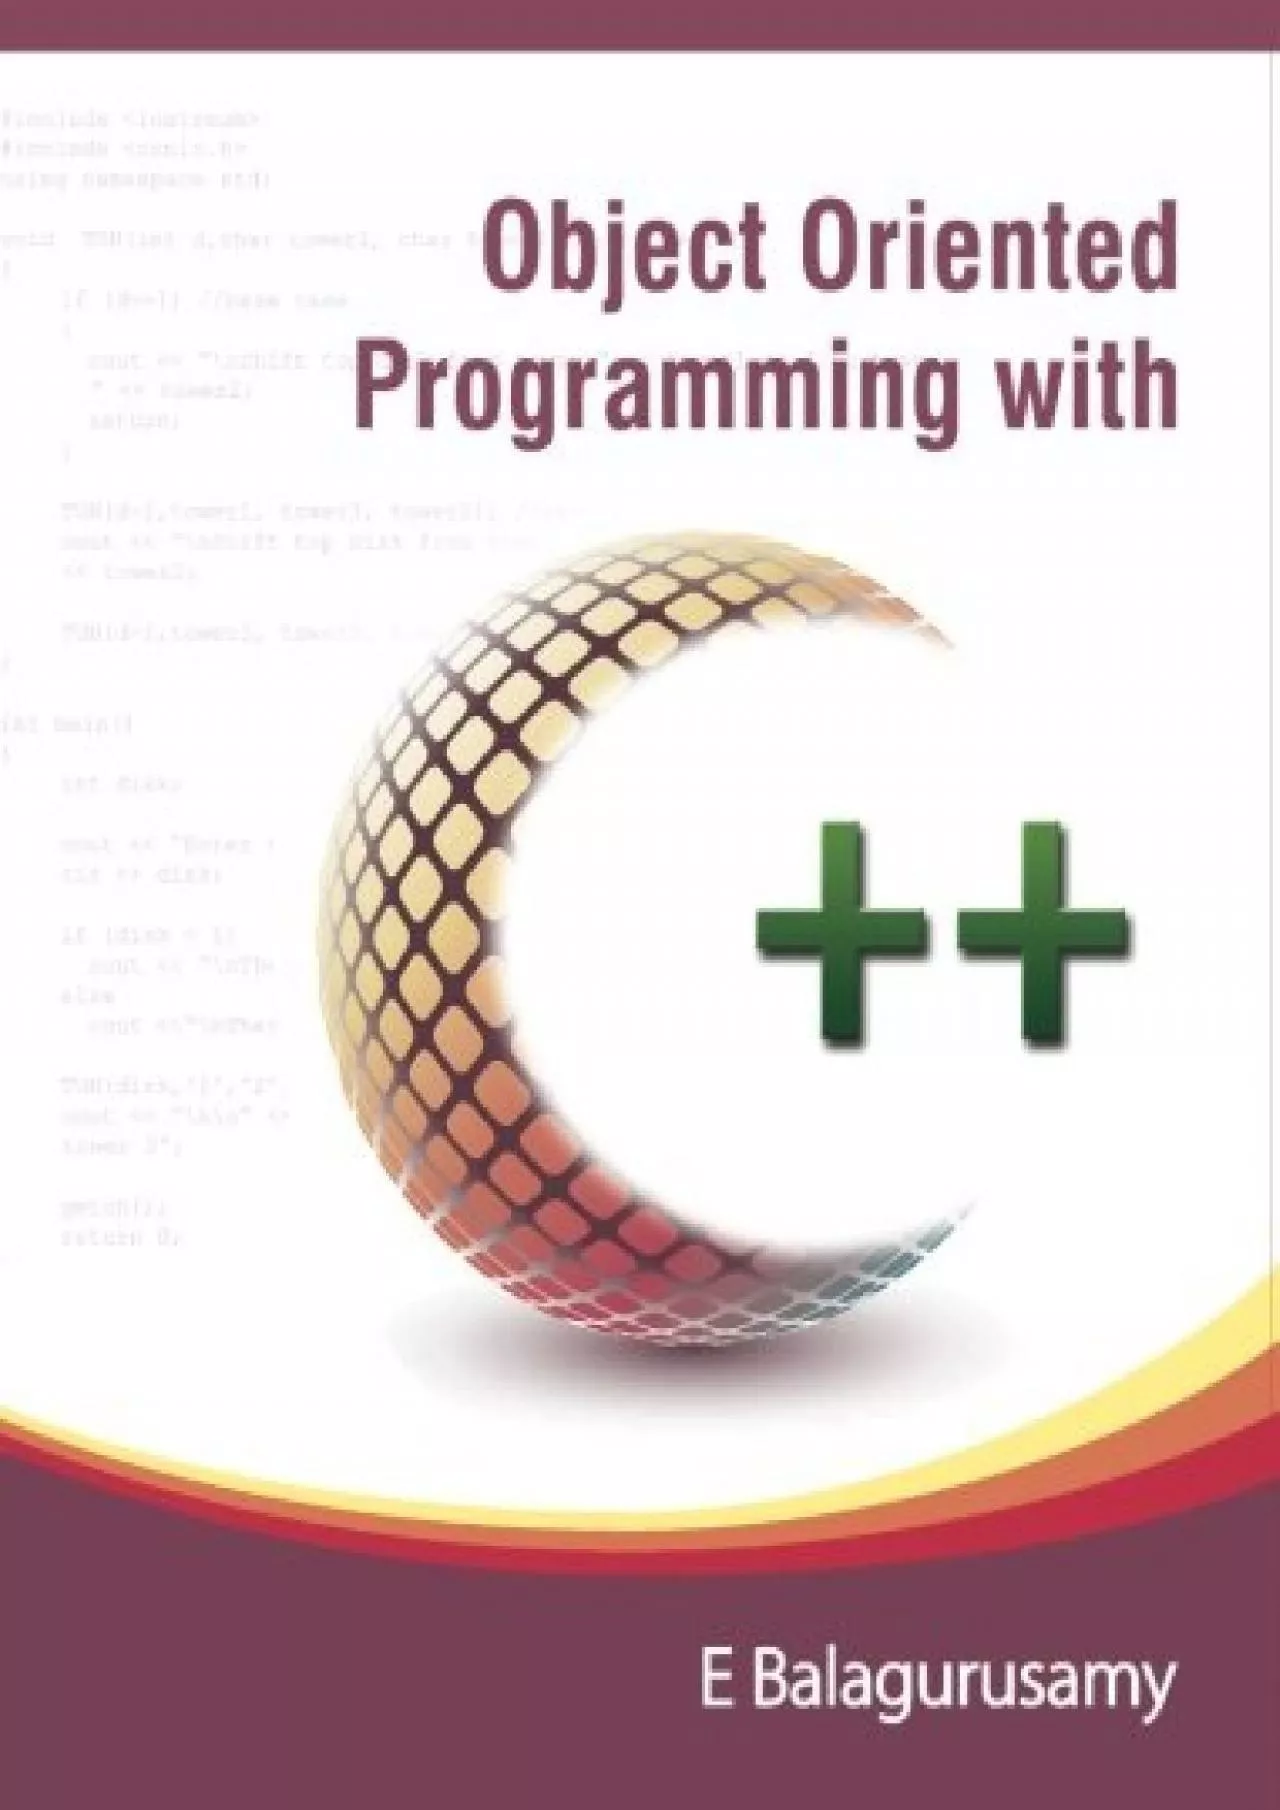 [READING BOOK]-Object Oriented Programming with C++